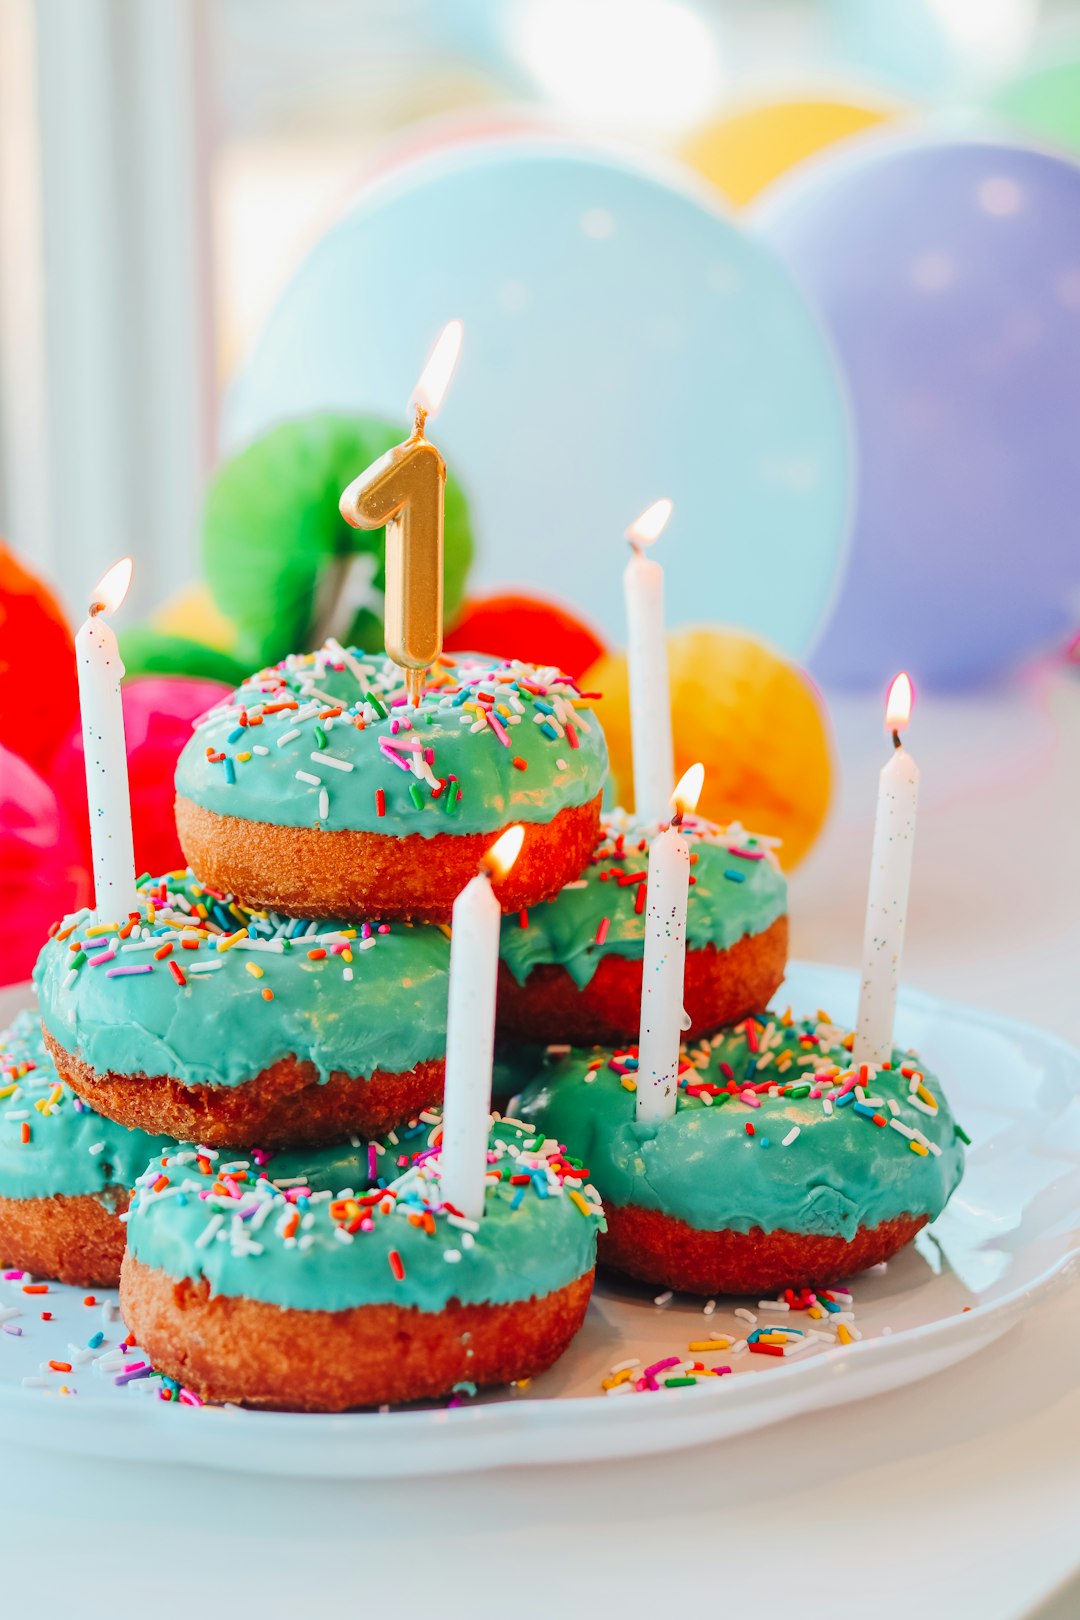 100+ Islamic Birthday Wishes: Meaningful Messages for Loved Ones